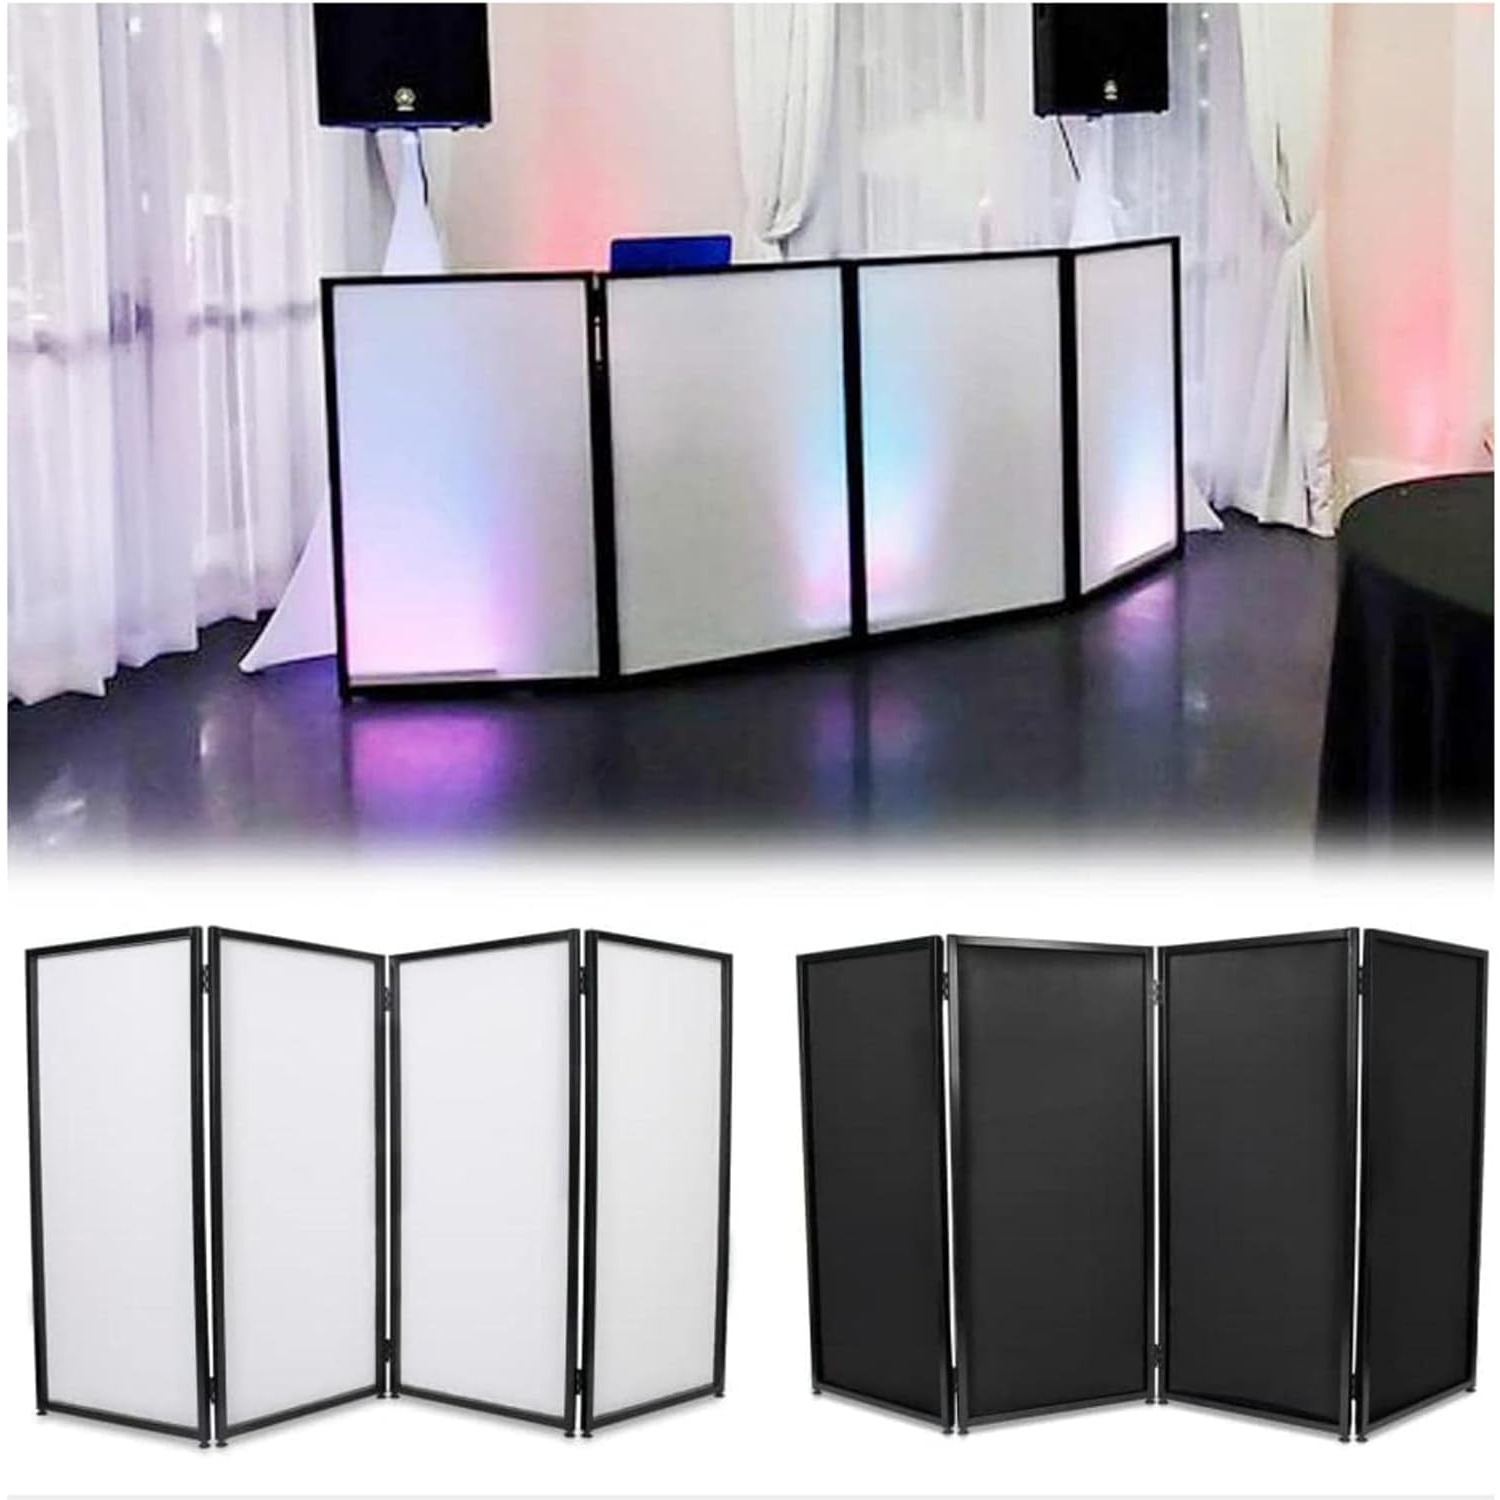 

Portable Dj Booth Foldable Cover Screen With Whiteblack Facadecloth Frame Booth Steel &travel Bag Case Projector Display Panel With Folding